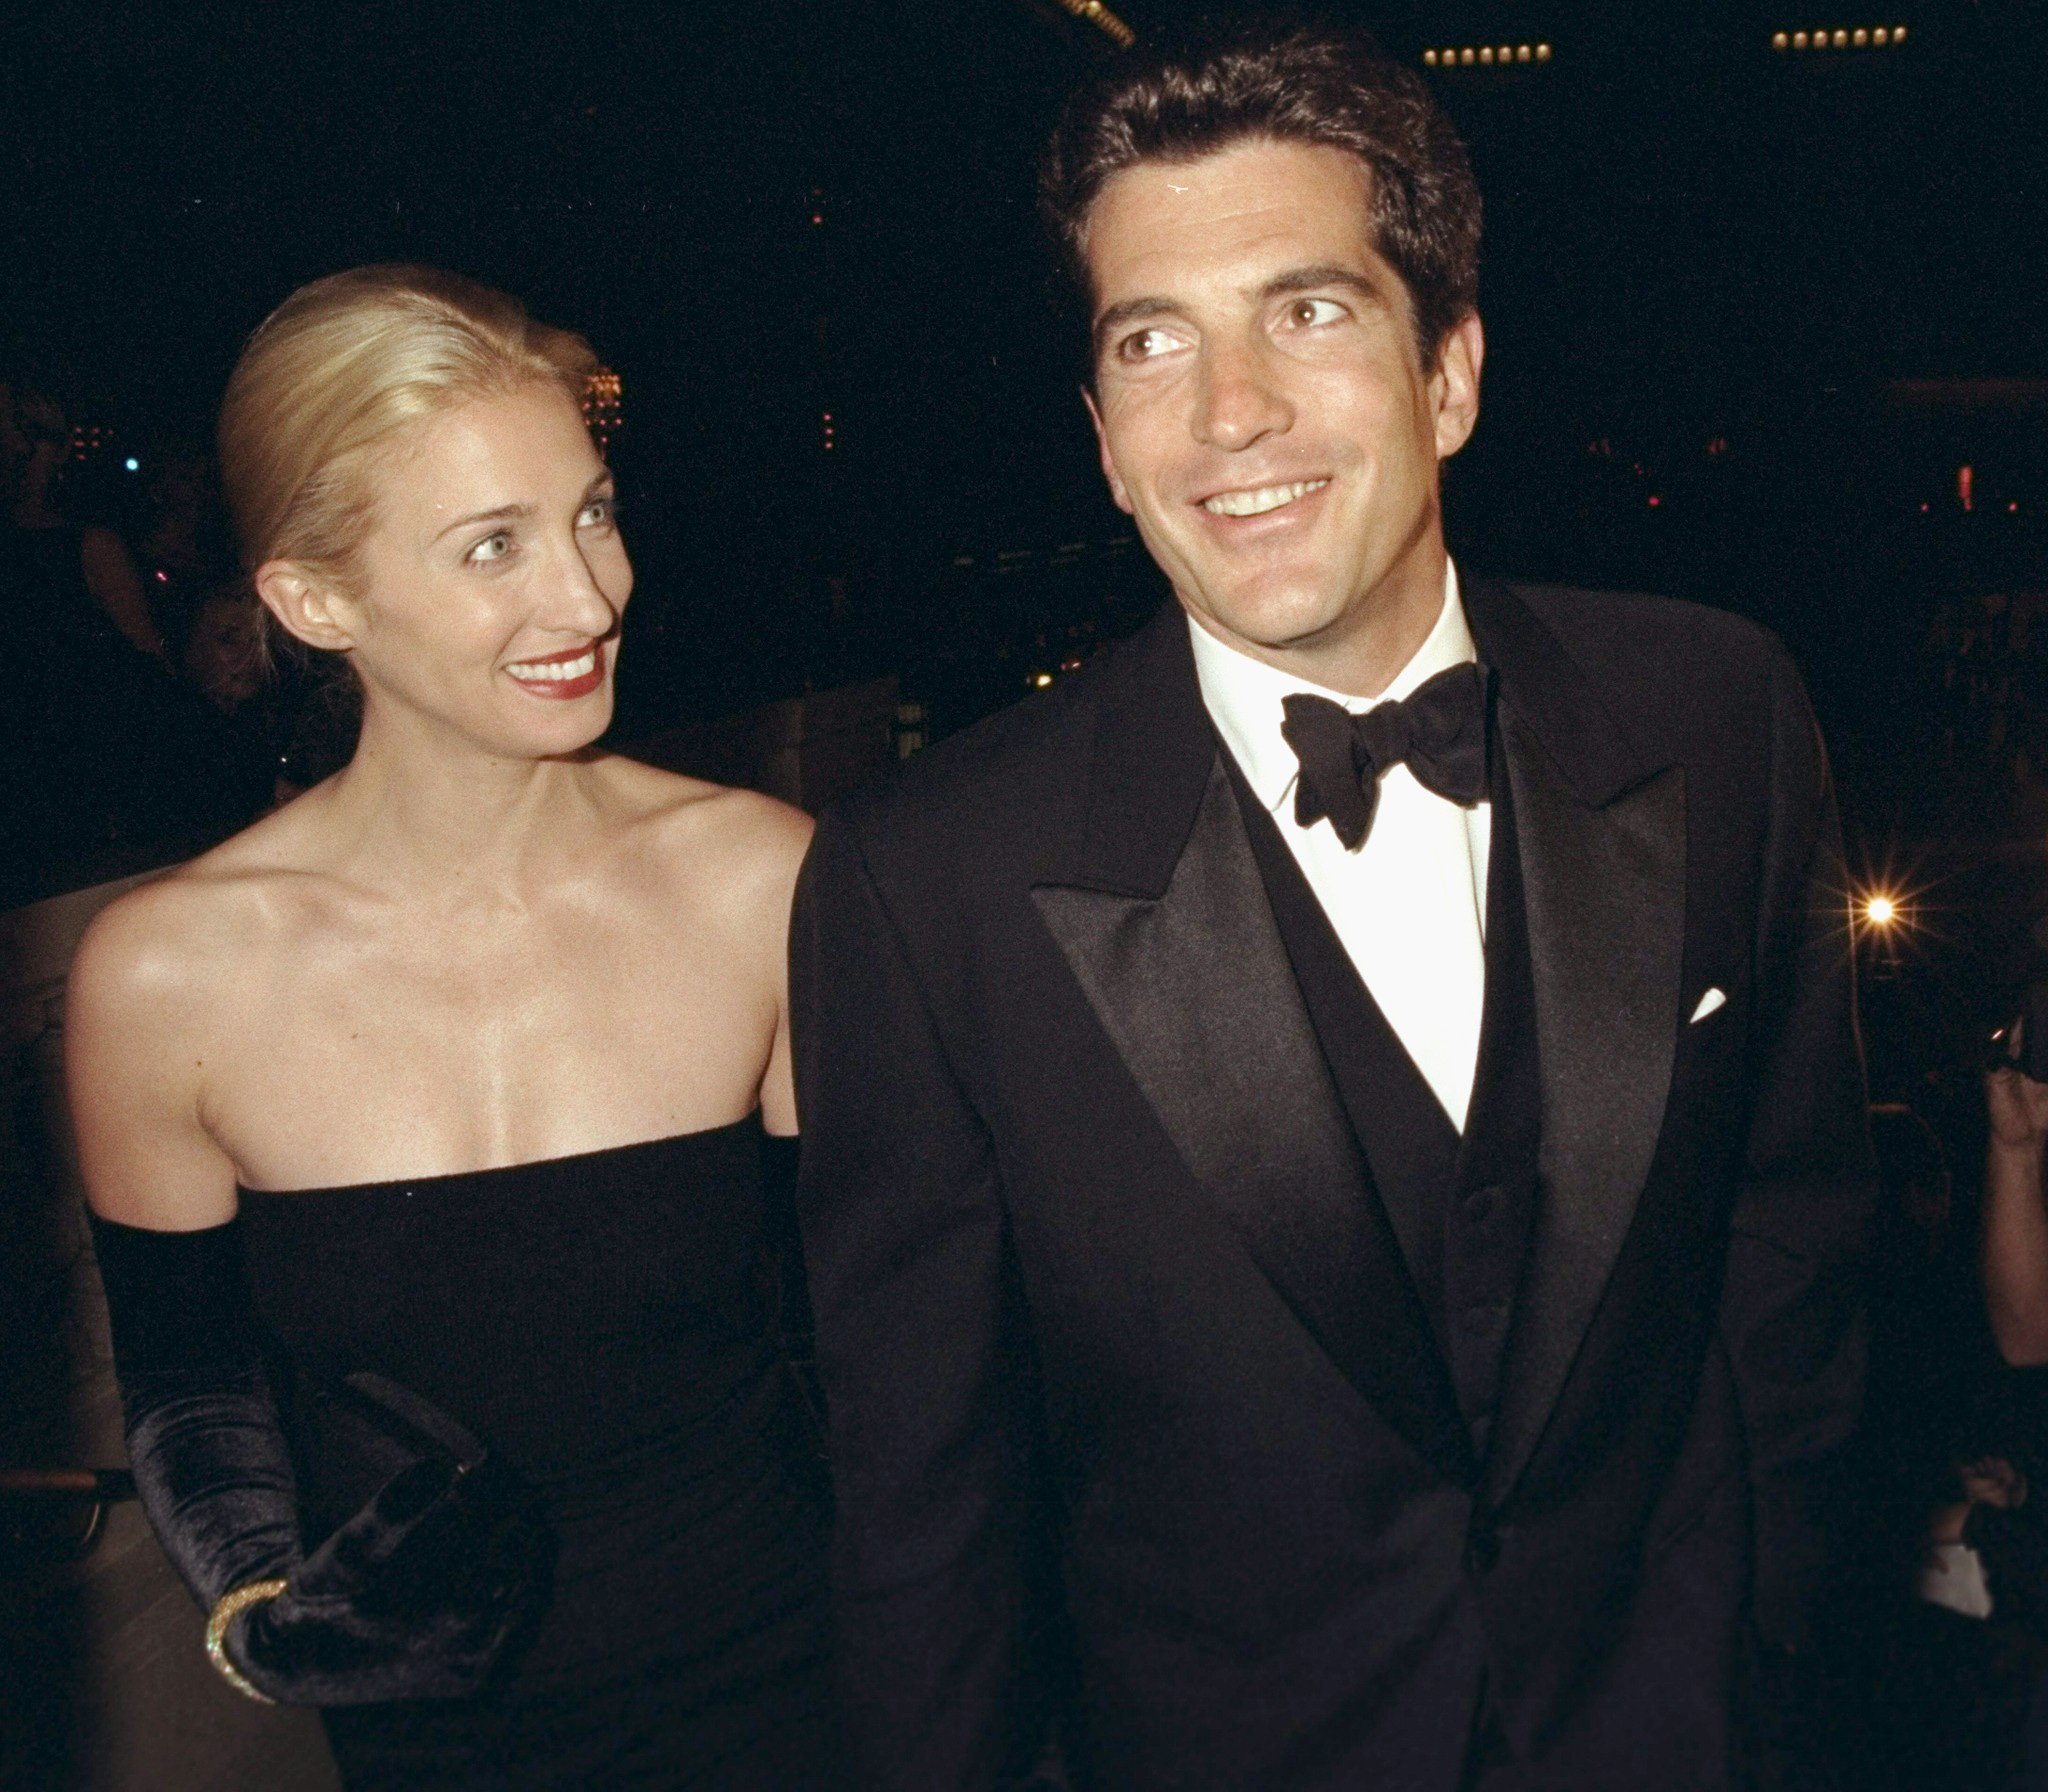 John F. Kennedy Jr. and Carolyn Bessette Kennedy during the Municipal Art Society gala at Grand Central Terminal. / Source: Getty Images